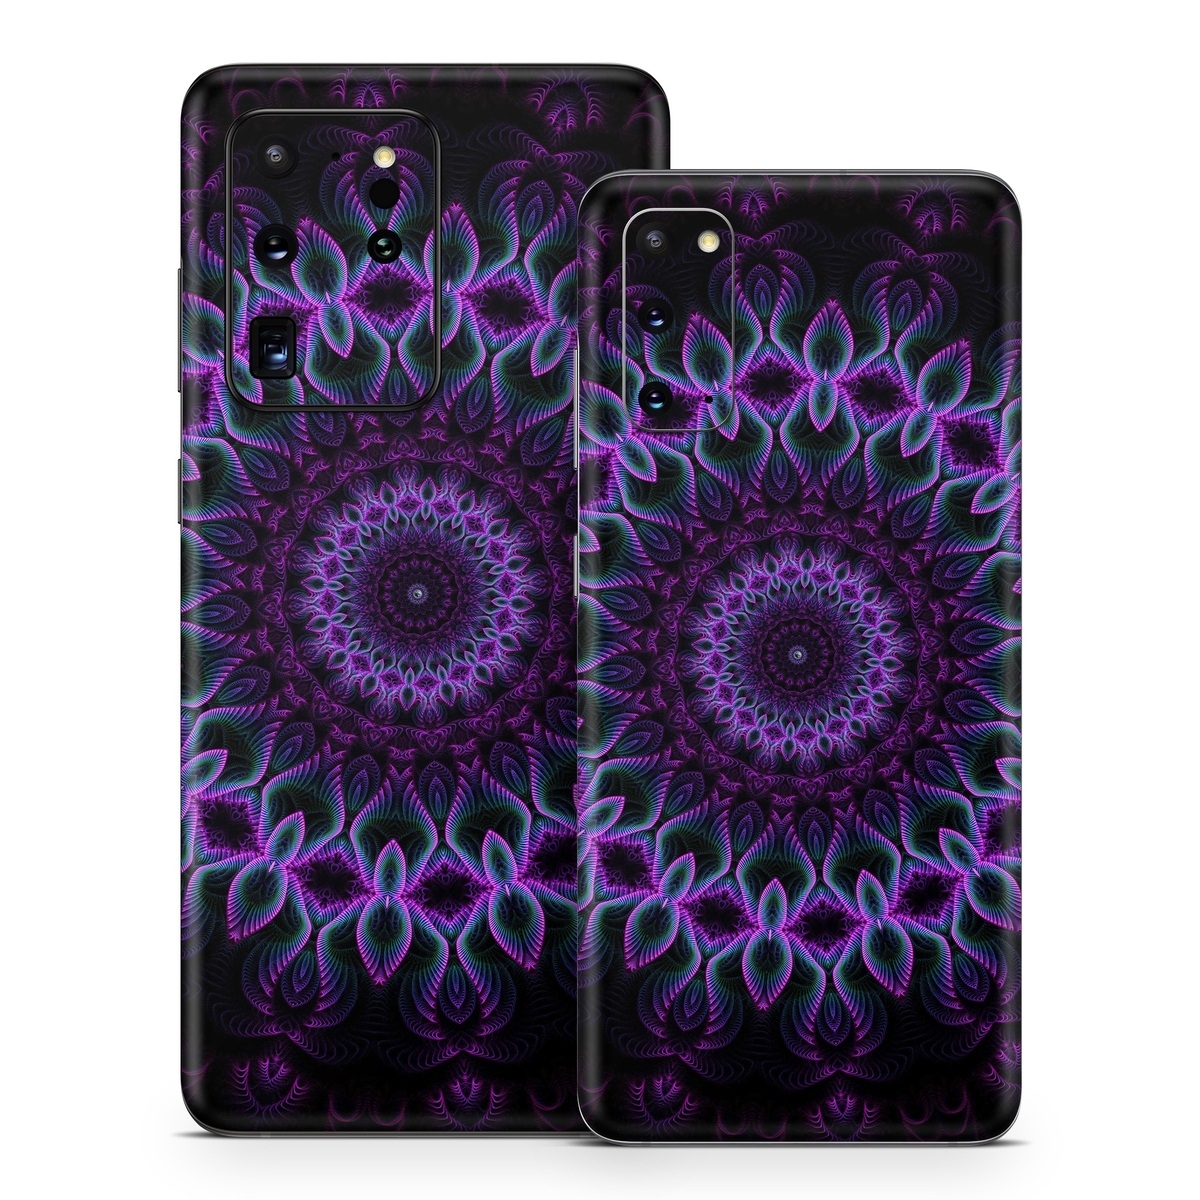 Samsung Galaxy S20 Series Skin design of Colorfulness, Pattern, Purple, Violet, Magenta, Red, Pink, Art, Fractal Art, Visual Arts, Design, Circle, Symmetry, Psychedelic Art, Motif, Kaleidoscope, Graphics, with black, purple, blue, white colors